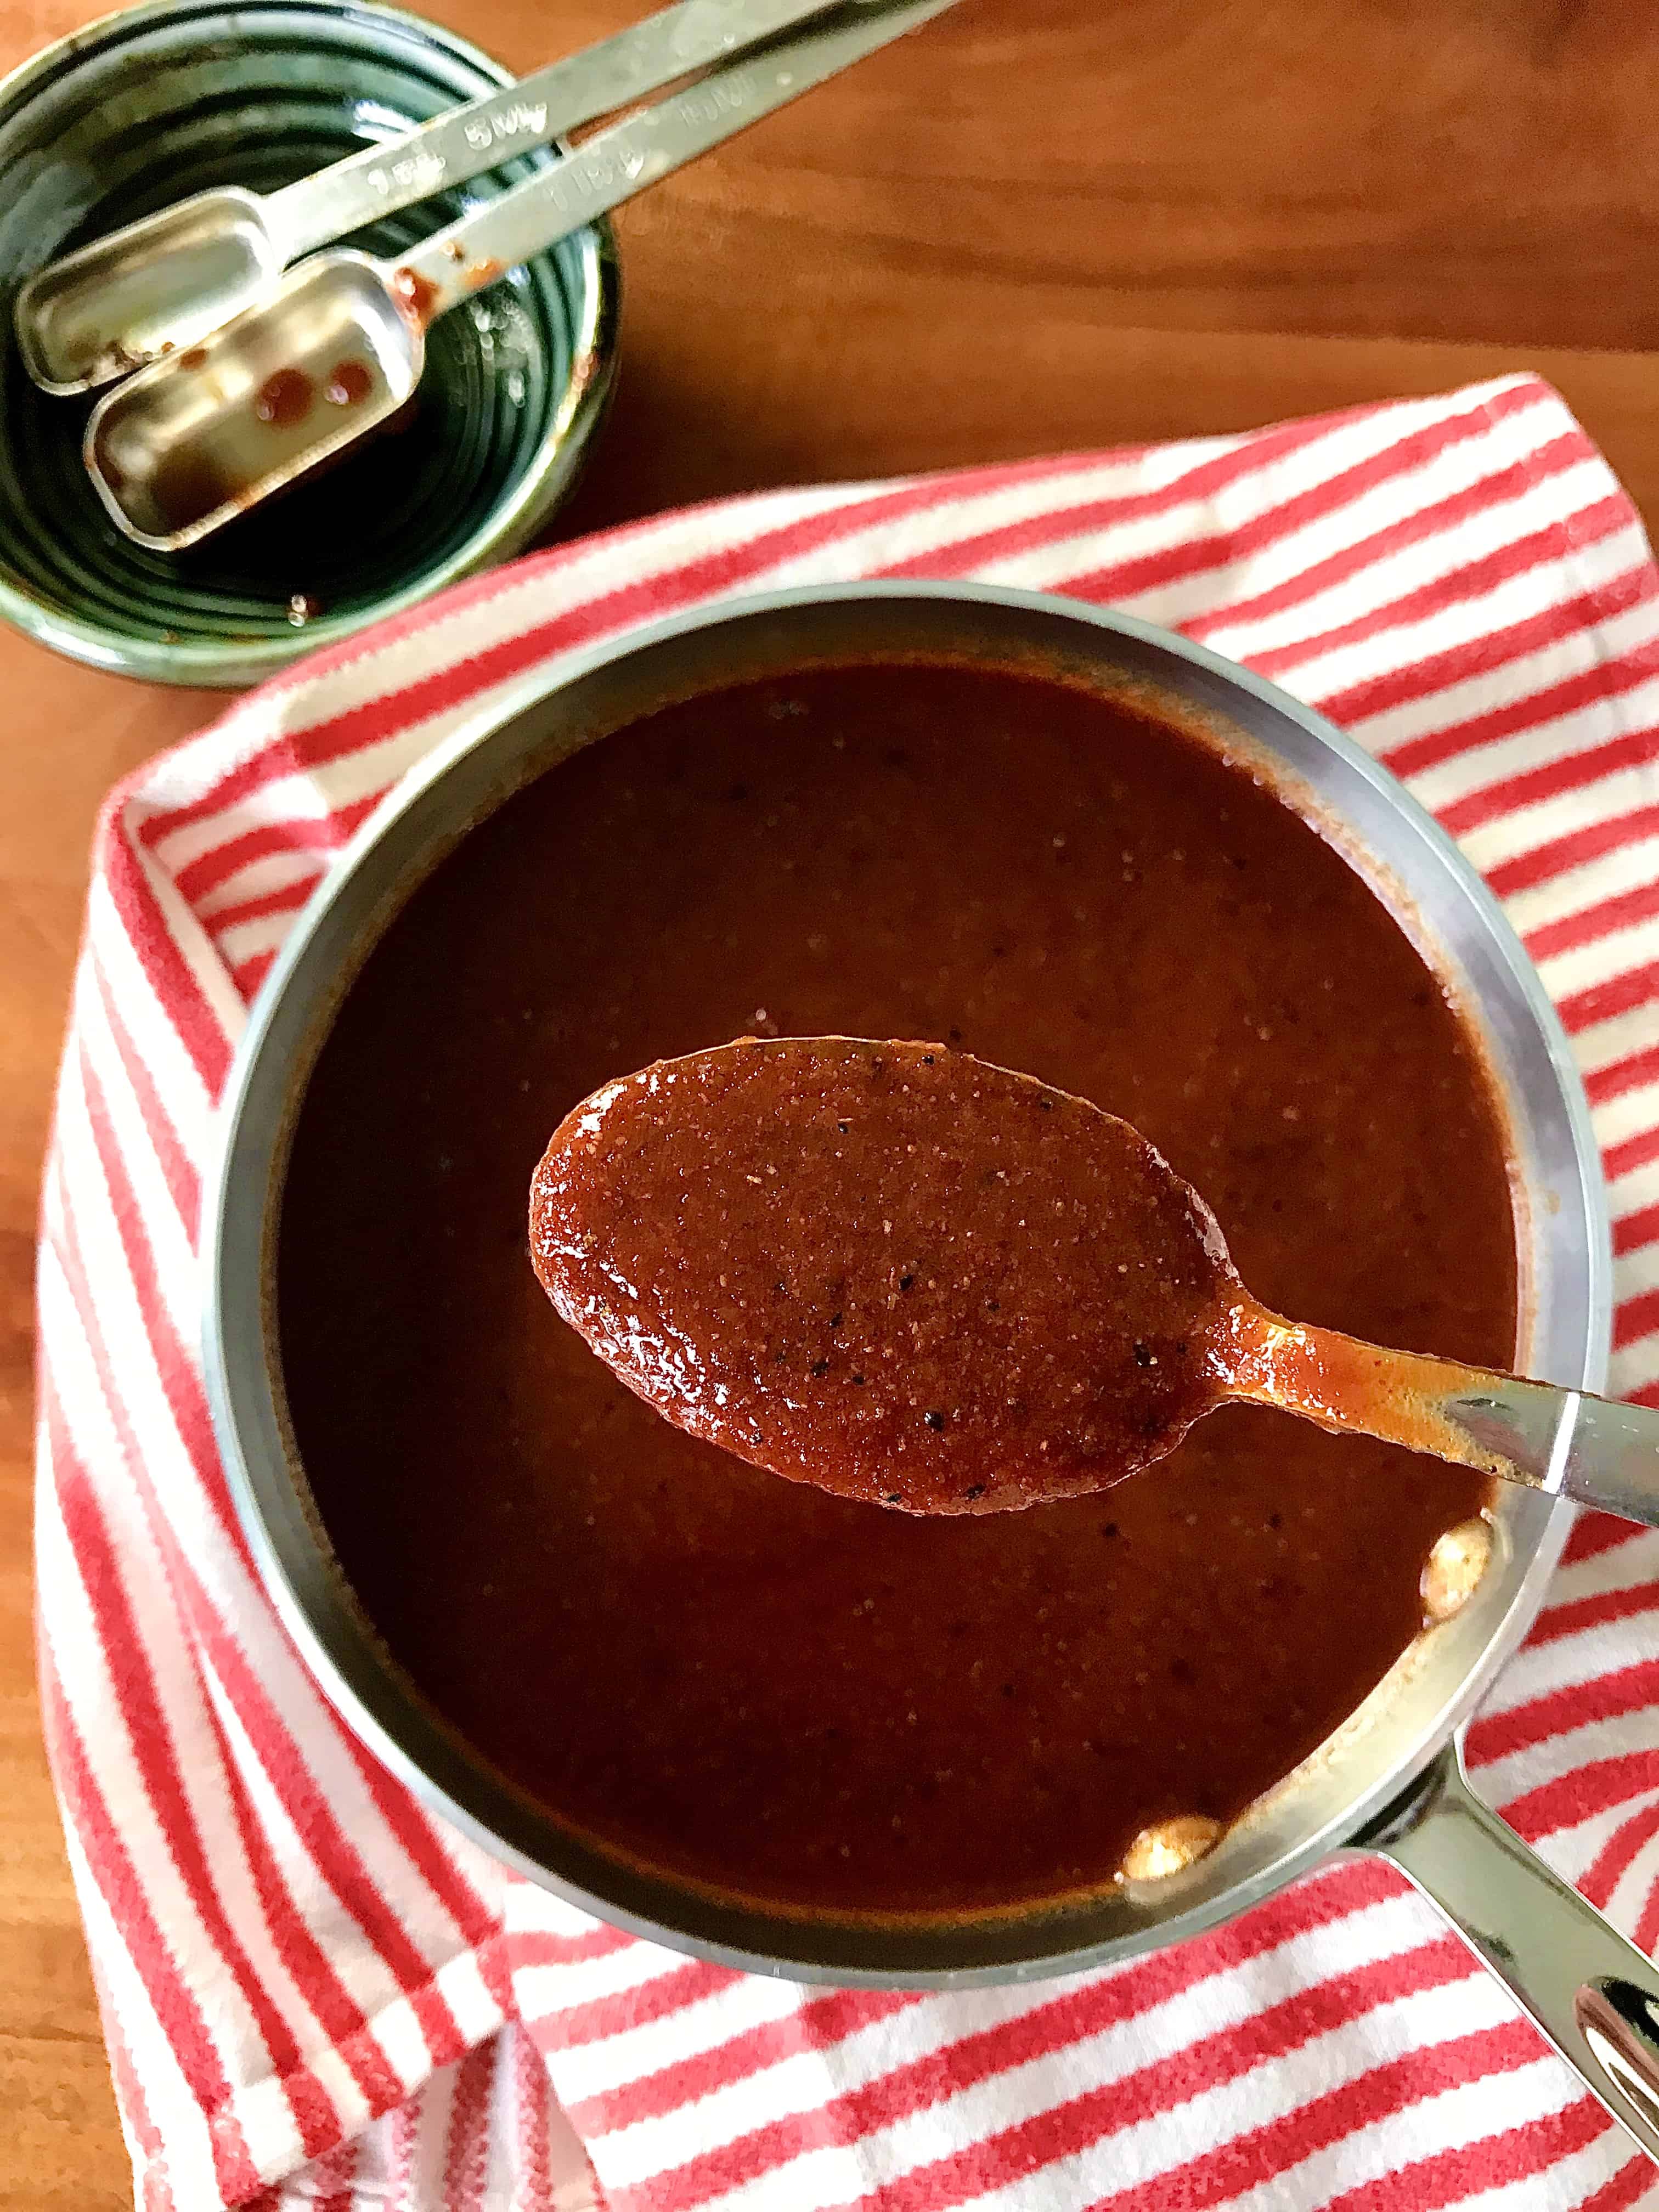 Gluten-free bbq sauce in a small pan on a red and white striped towel with a spoon over the pan holding some sauce.